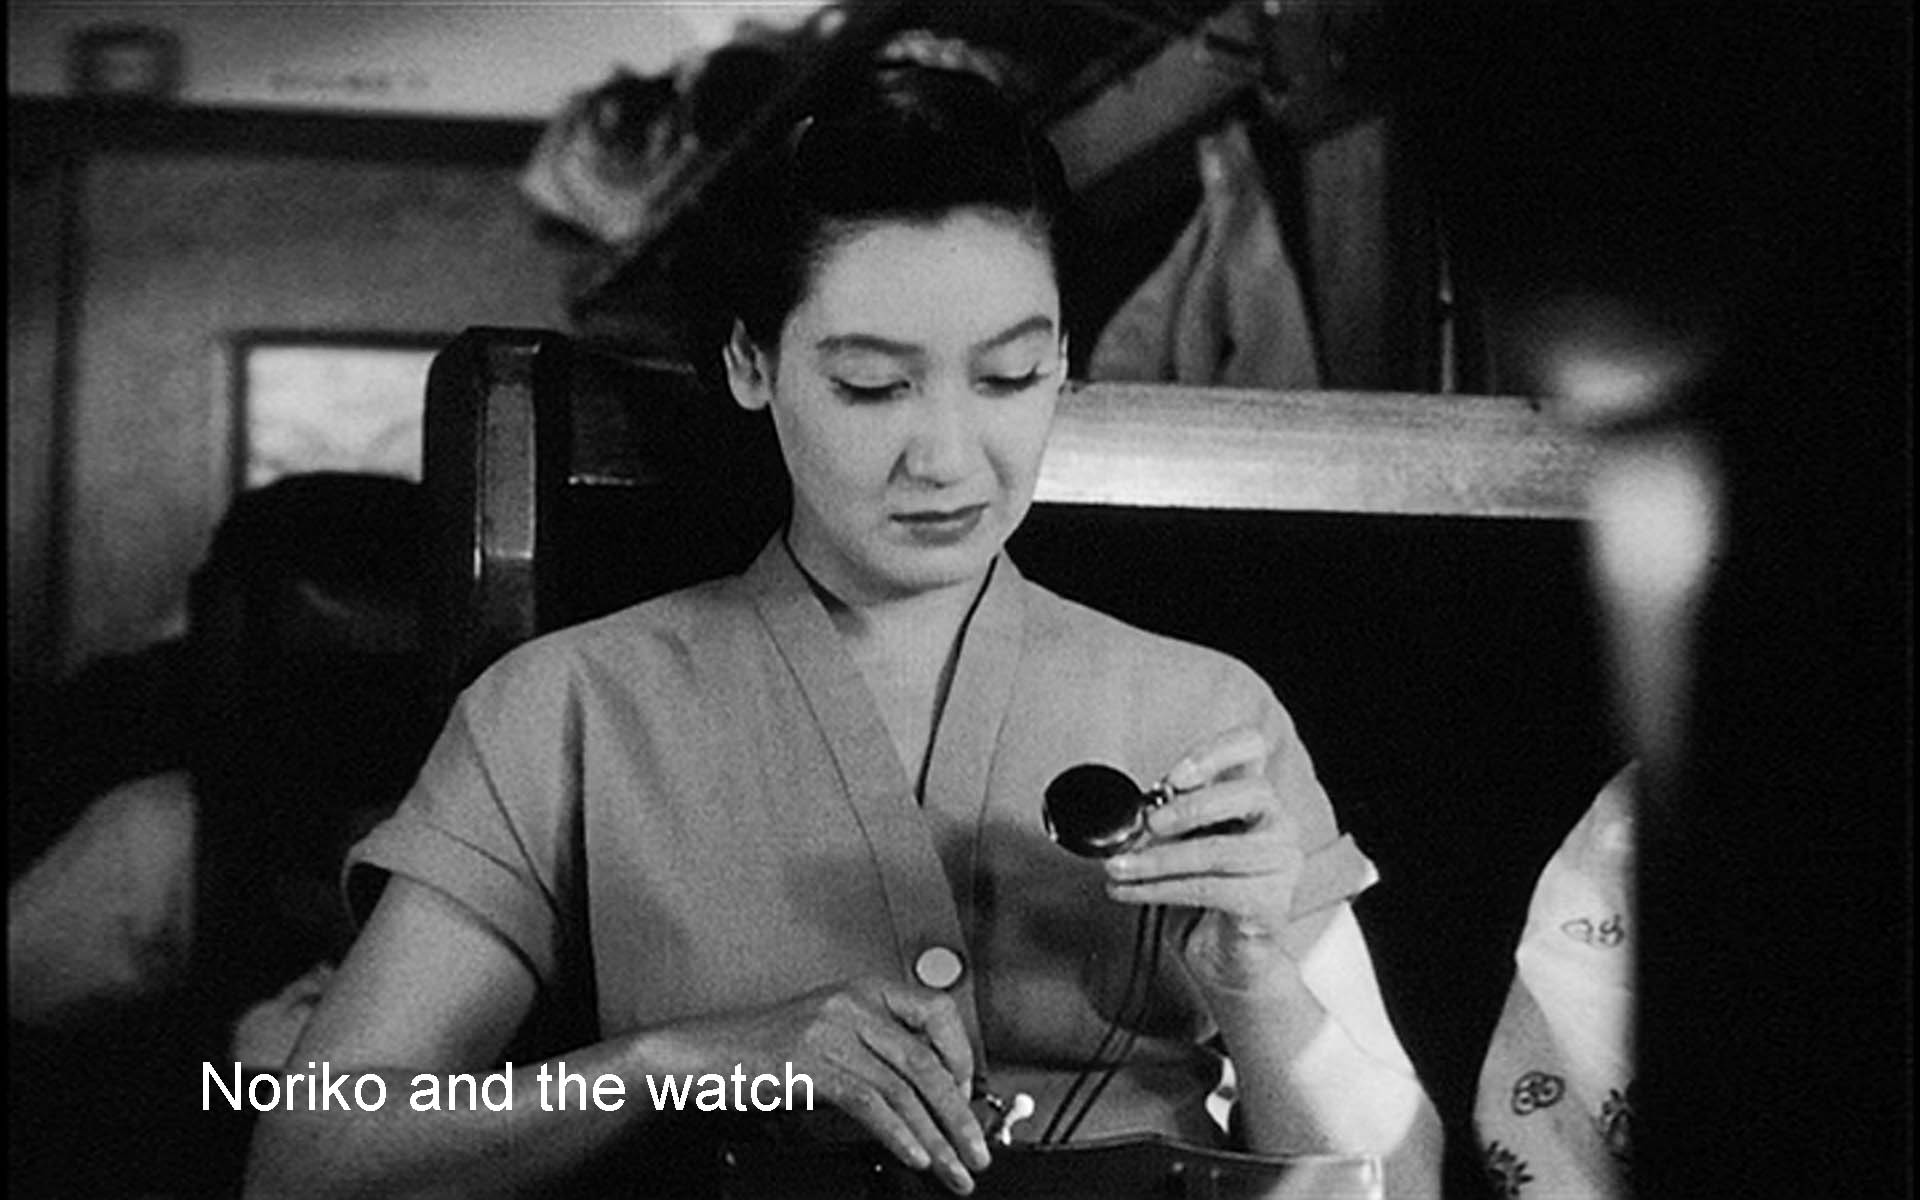 Noriko and the watch